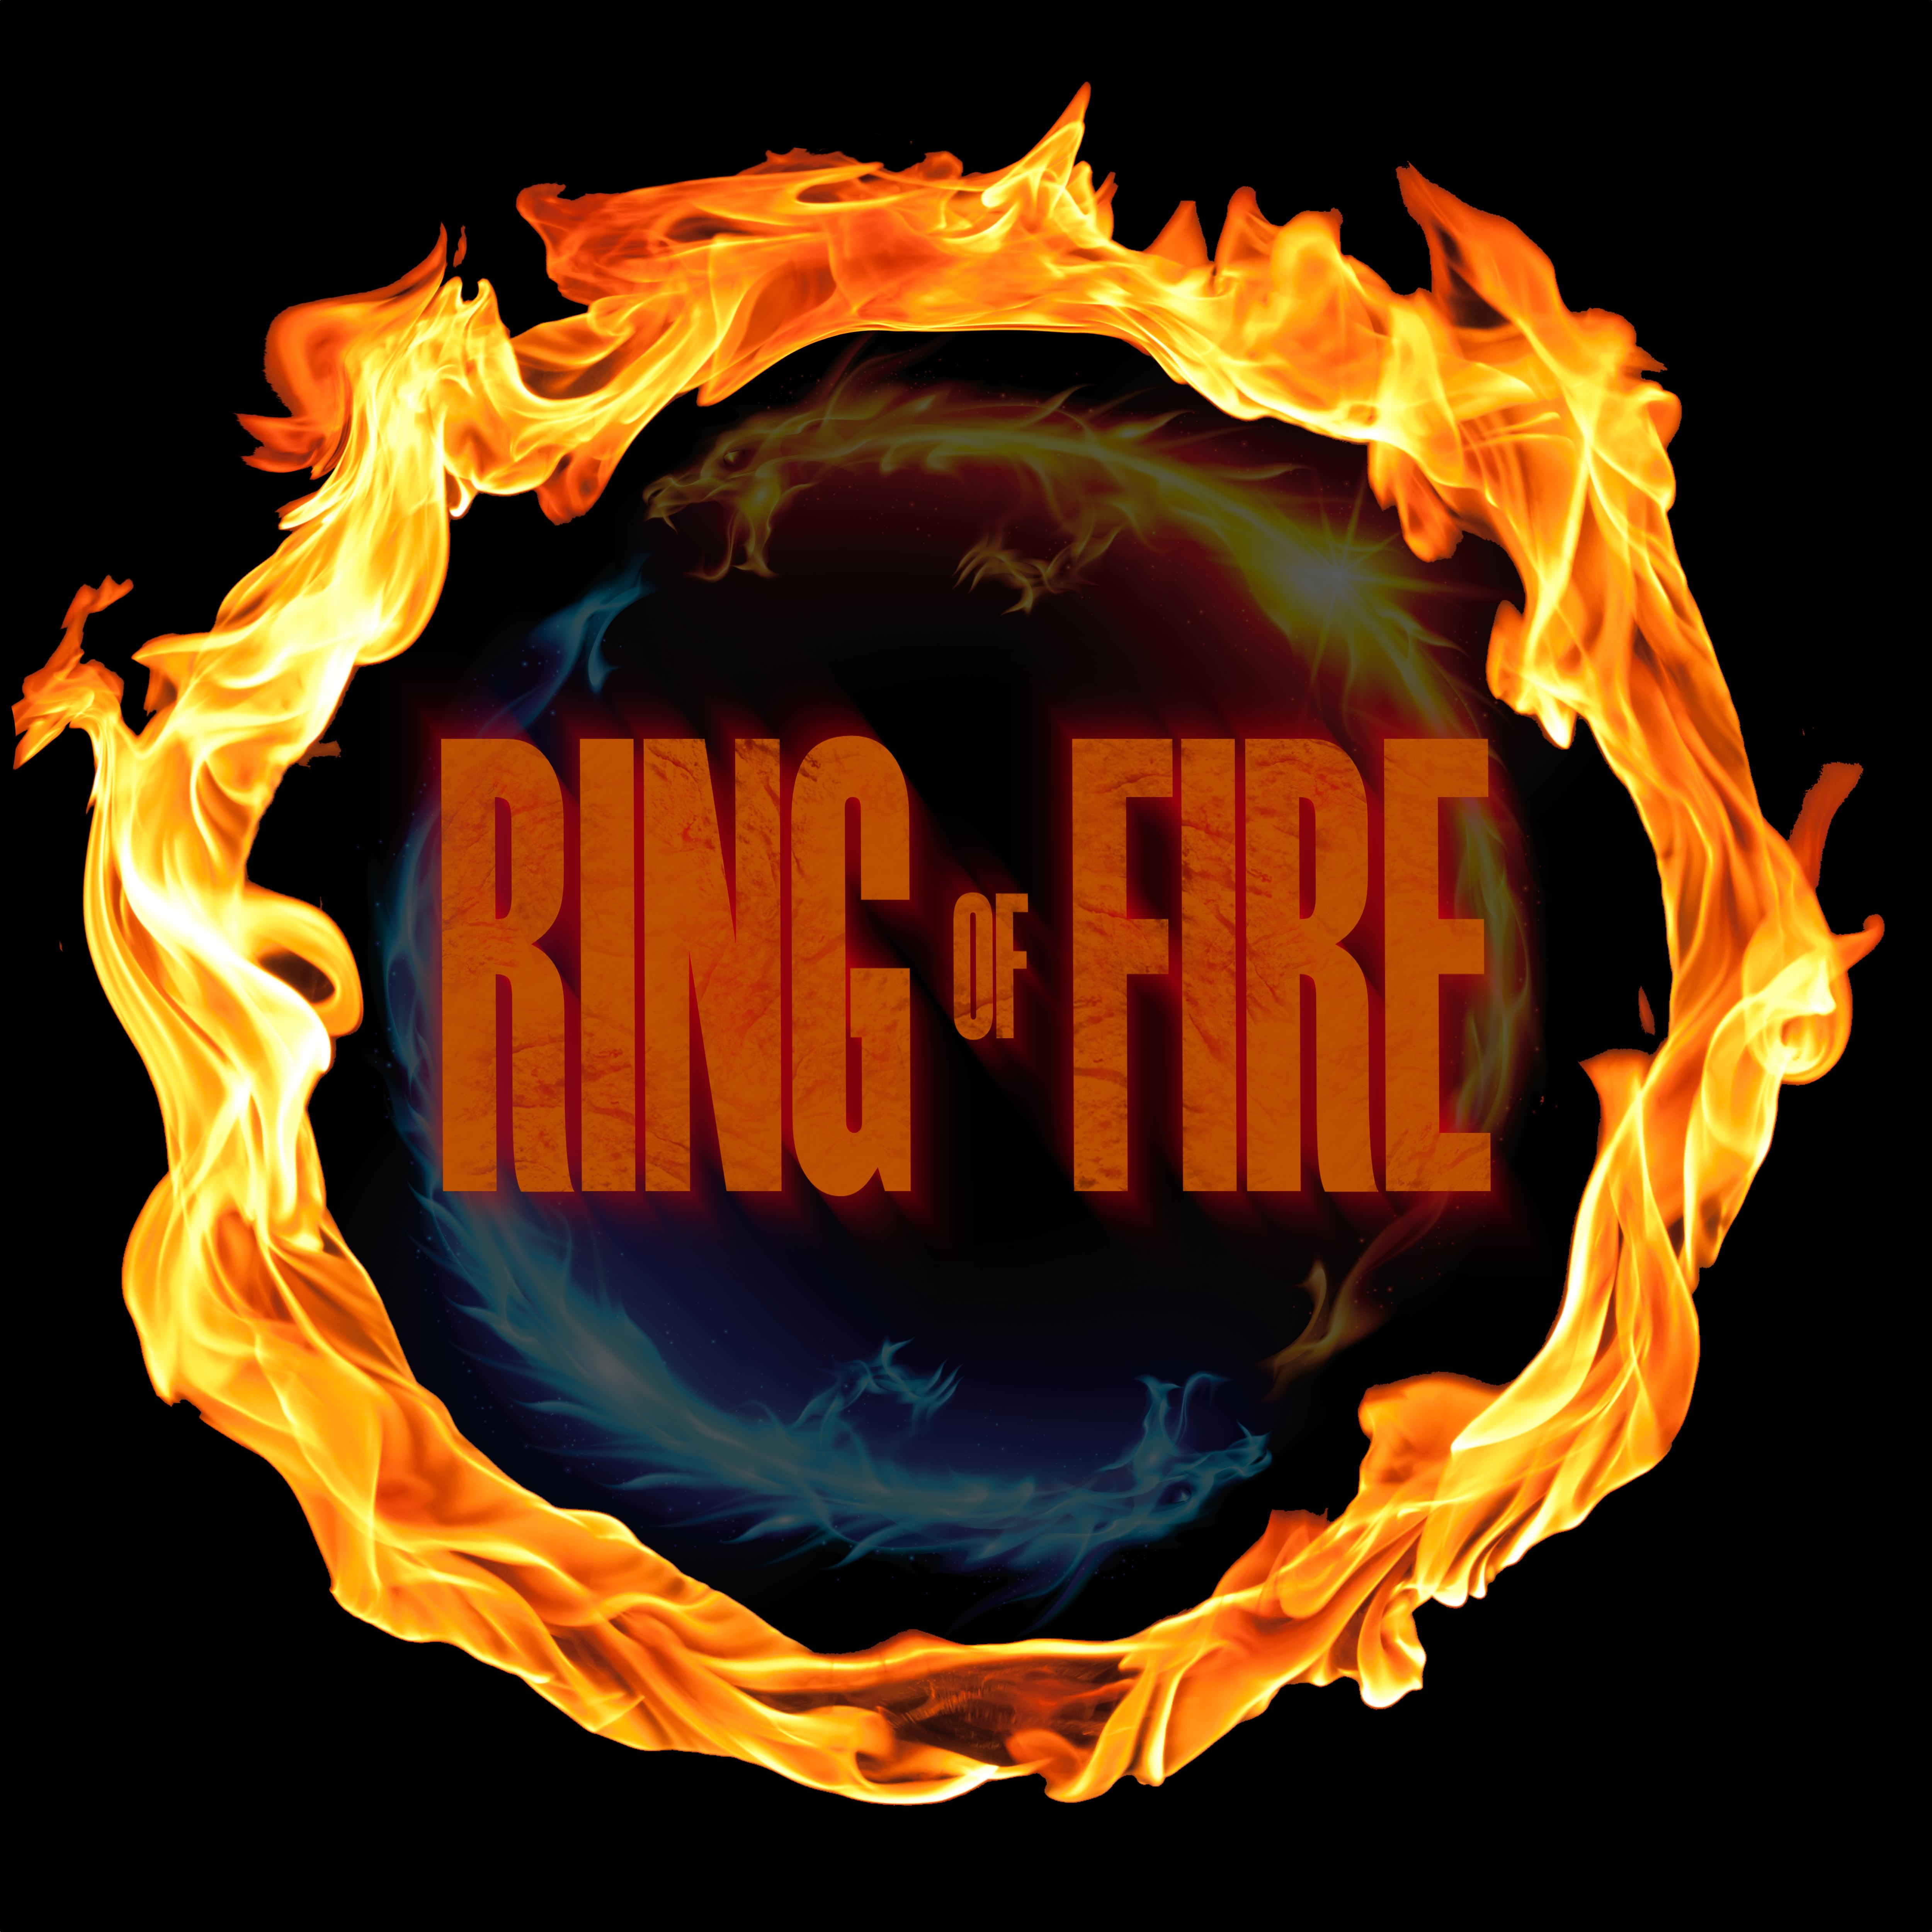 Flash Friday Fiction Ring of Fire Badge